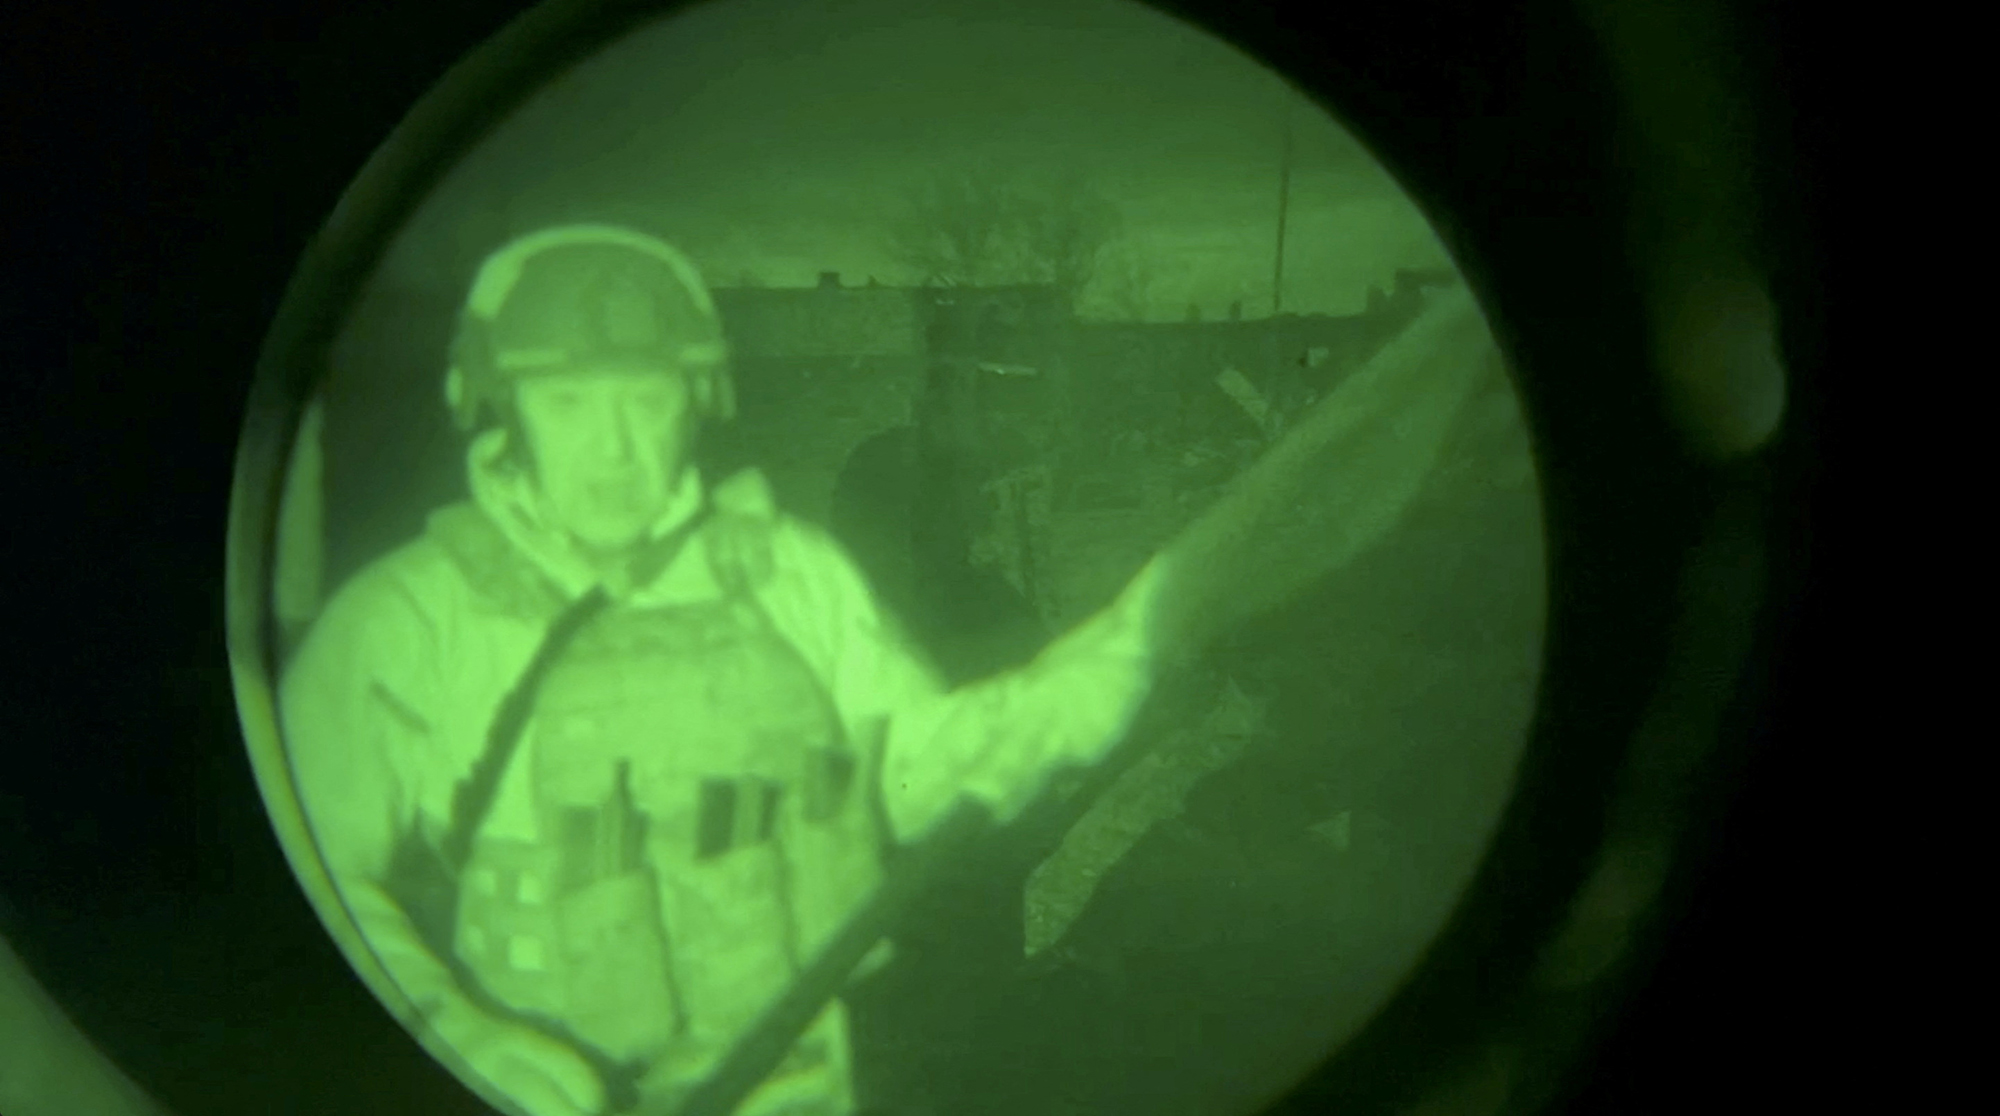 Yevgeny Prigozhin, founder of Russia's Wagner mercenary force, speaks in a video message that was allegedly filmed near the city administration building in Bakhmut, Ukraine, in this still image from an undated video filmed through a night vision device and released on April 3.